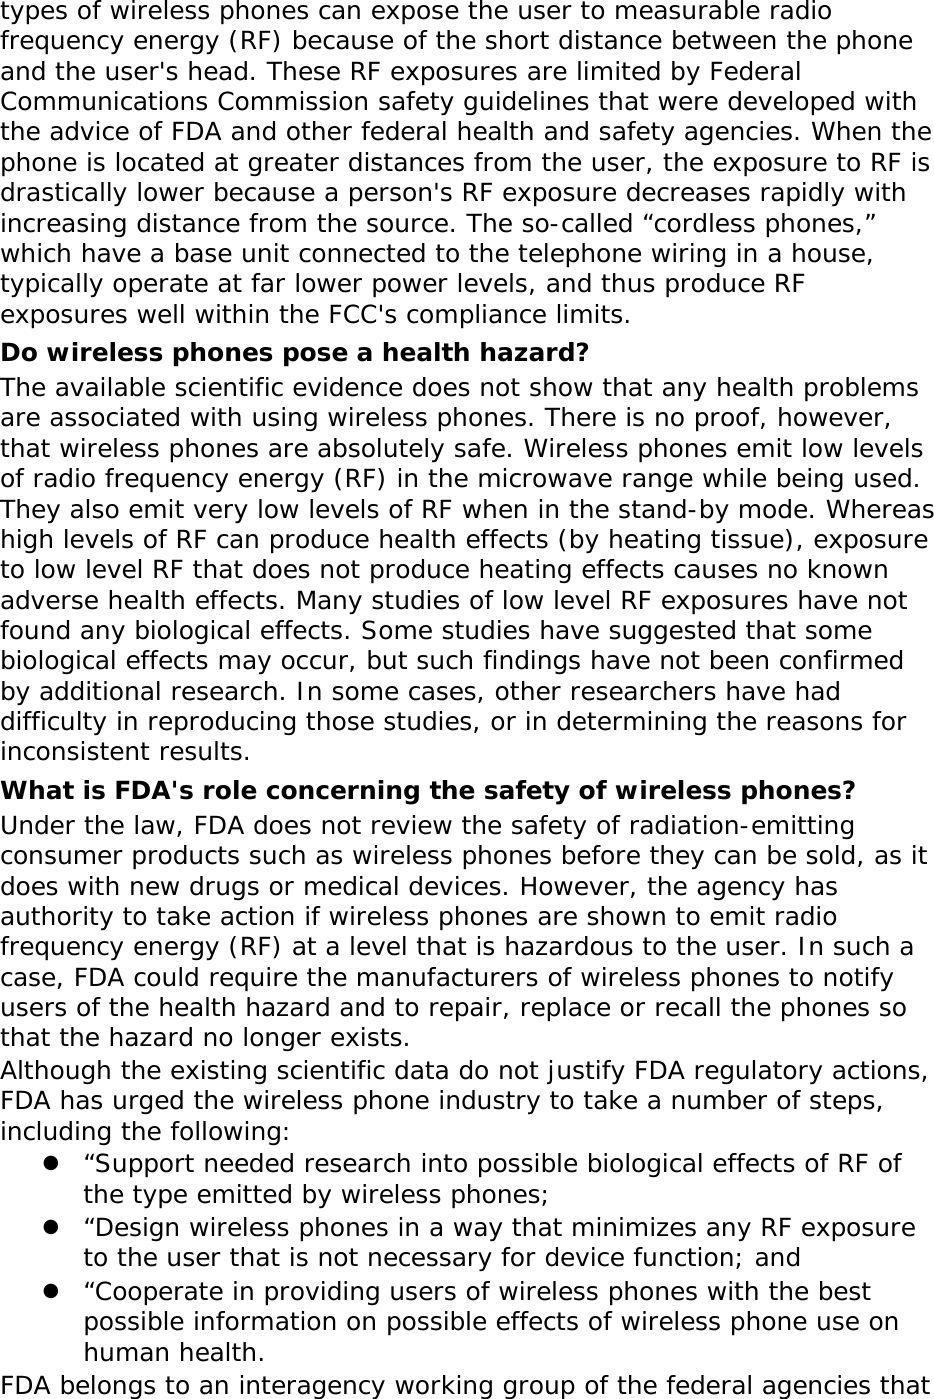 types of wireless phones can expose the user to measurable radio frequency energy (RF) because of the short distance between the phone and the user&apos;s head. These RF exposures are limited by Federal Communications Commission safety guidelines that were developed with the advice of FDA and other federal health and safety agencies. When the phone is located at greater distances from the user, the exposure to RF is drastically lower because a person&apos;s RF exposure decreases rapidly with increasing distance from the source. The so-called “cordless phones,” which have a base unit connected to the telephone wiring in a house, typically operate at far lower power levels, and thus produce RF exposures well within the FCC&apos;s compliance limits. Do wireless phones pose a health hazard? The available scientific evidence does not show that any health problems are associated with using wireless phones. There is no proof, however, that wireless phones are absolutely safe. Wireless phones emit low levels of radio frequency energy (RF) in the microwave range while being used. They also emit very low levels of RF when in the stand-by mode. Whereas high levels of RF can produce health effects (by heating tissue), exposure to low level RF that does not produce heating effects causes no known adverse health effects. Many studies of low level RF exposures have not found any biological effects. Some studies have suggested that some biological effects may occur, but such findings have not been confirmed by additional research. In some cases, other researchers have had difficulty in reproducing those studies, or in determining the reasons for inconsistent results. What is FDA&apos;s role concerning the safety of wireless phones? Under the law, FDA does not review the safety of radiation-emitting consumer products such as wireless phones before they can be sold, as it does with new drugs or medical devices. However, the agency has authority to take action if wireless phones are shown to emit radio frequency energy (RF) at a level that is hazardous to the user. In such a case, FDA could require the manufacturers of wireless phones to notify users of the health hazard and to repair, replace or recall the phones so that the hazard no longer exists. Although the existing scientific data do not justify FDA regulatory actions, FDA has urged the wireless phone industry to take a number of steps, including the following:  “Support needed research into possible biological effects of RF of the type emitted by wireless phones;  “Design wireless phones in a way that minimizes any RF exposure to the user that is not necessary for device function; and  “Cooperate in providing users of wireless phones with the best possible information on possible effects of wireless phone use on human health. FDA belongs to an interagency working group of the federal agencies that 